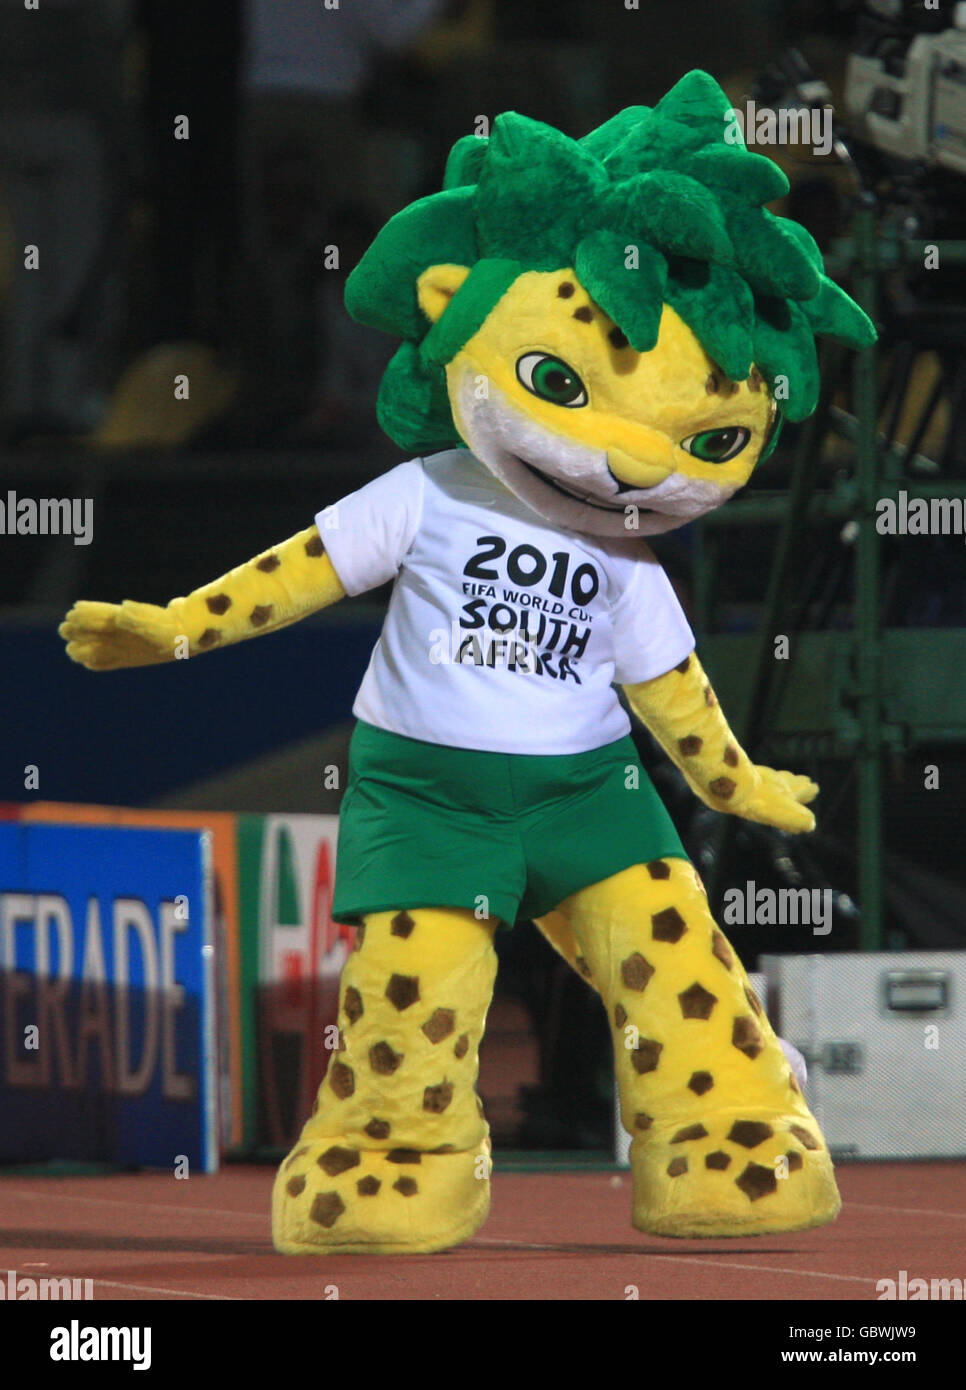 Soccer - Confederations Cup 2009 - Group B - Egypt v USA - Royal Bafokeng Stadium. The official mascot for the World Cup Zakhumi performs at half time Stock Photo